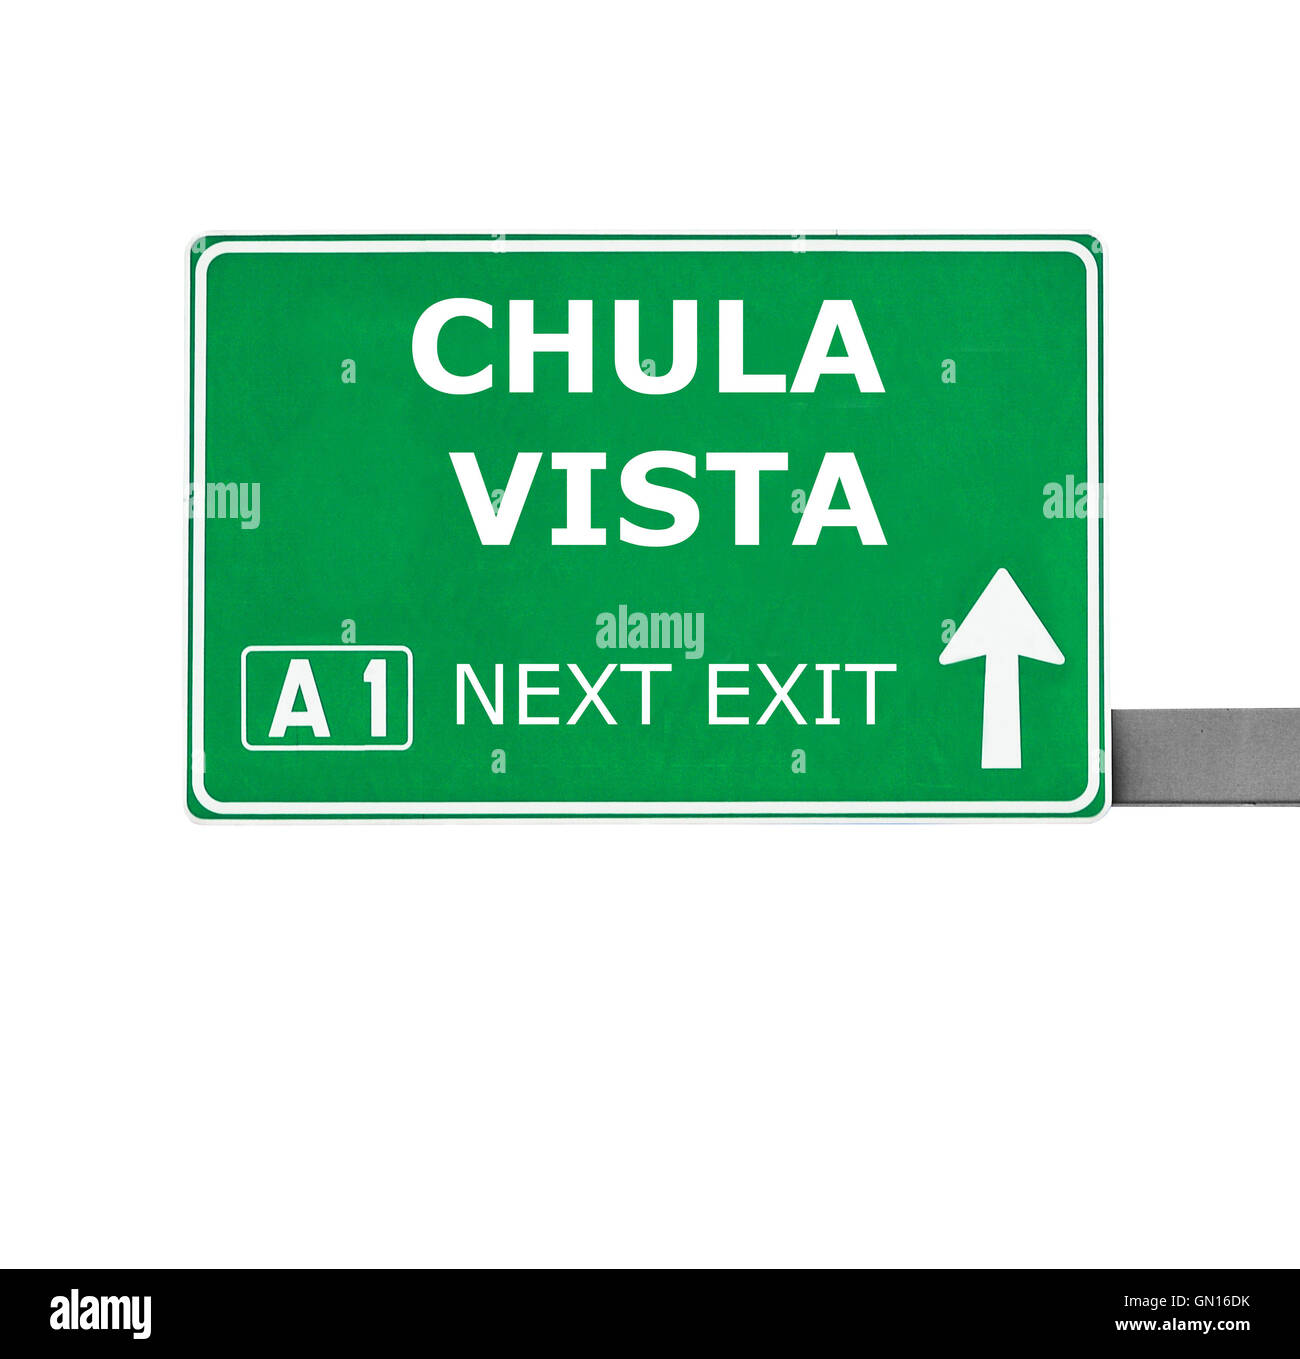 CHULA VISTA road sign isolated on white Banque D'Images